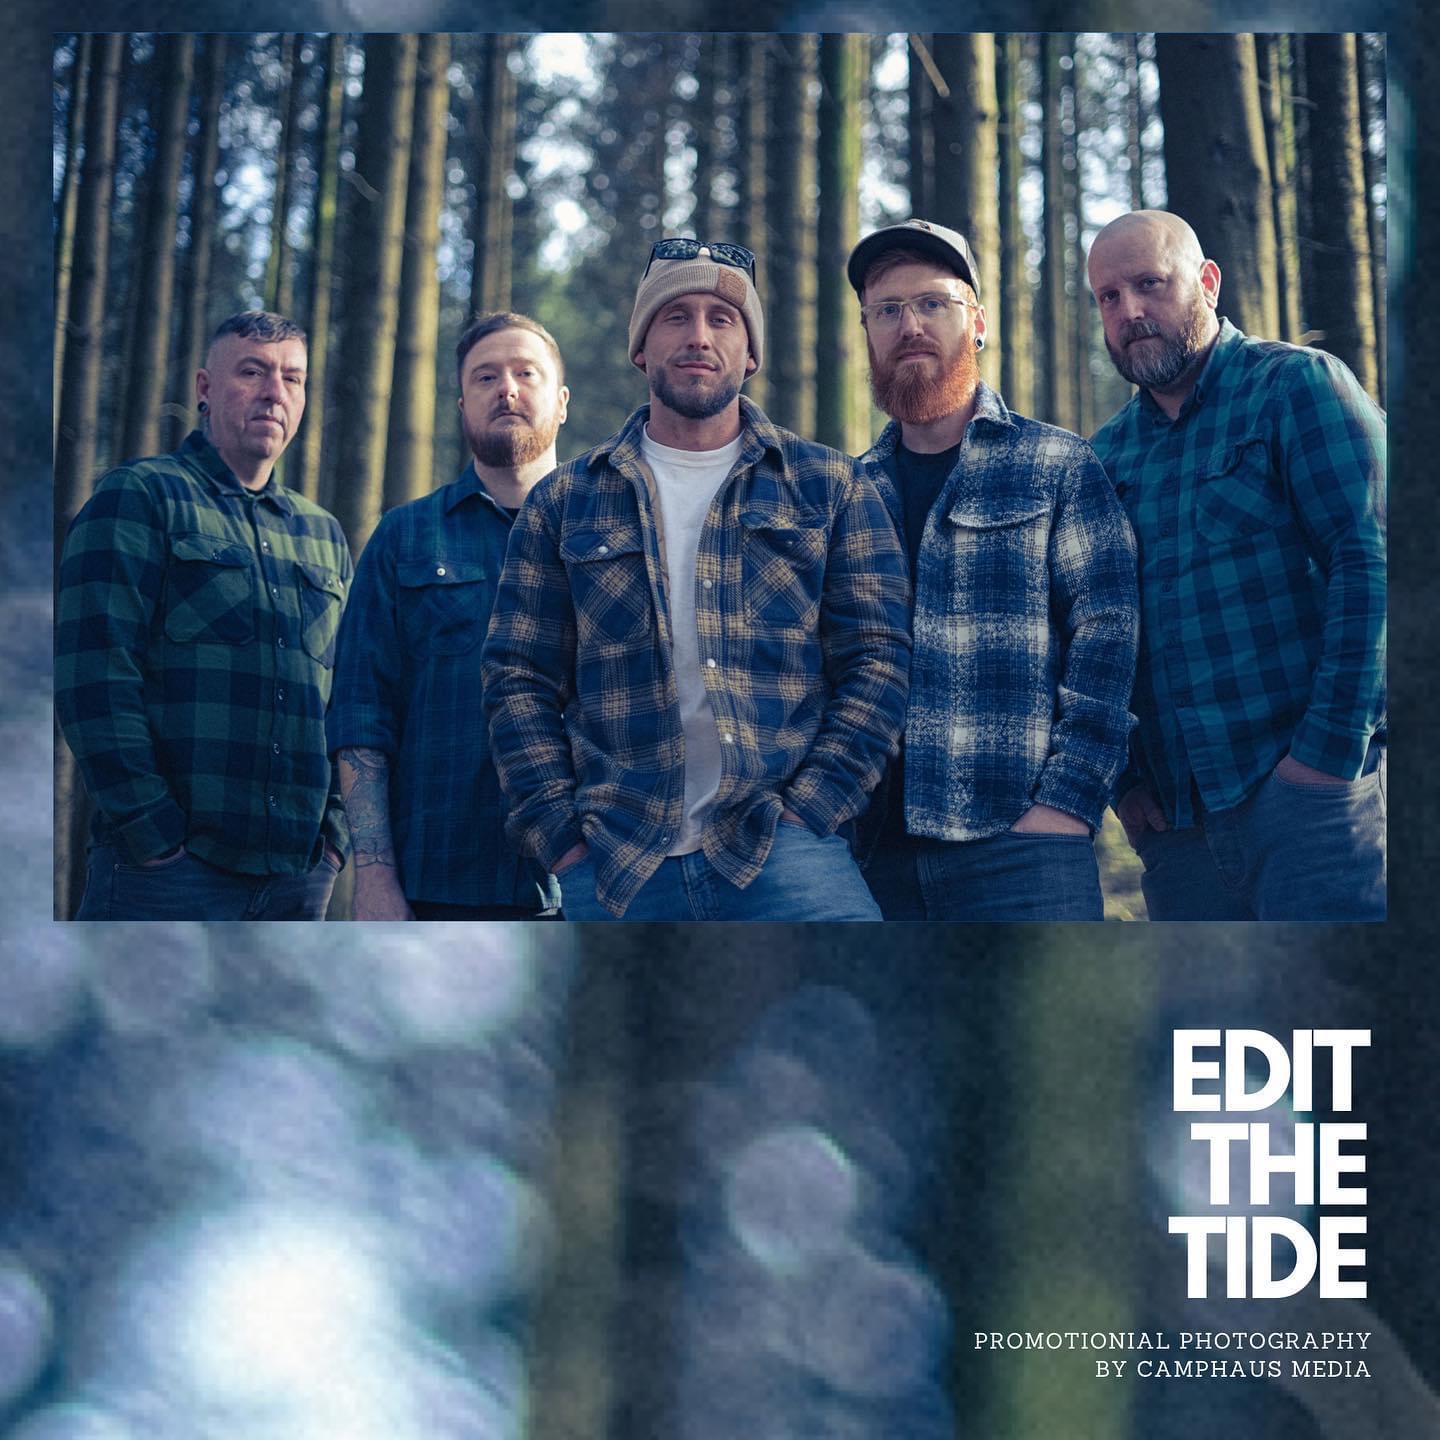 STRANGE CALLS AND SKYLINES – AN INTERVIEW WITH EDIT THE TIDE